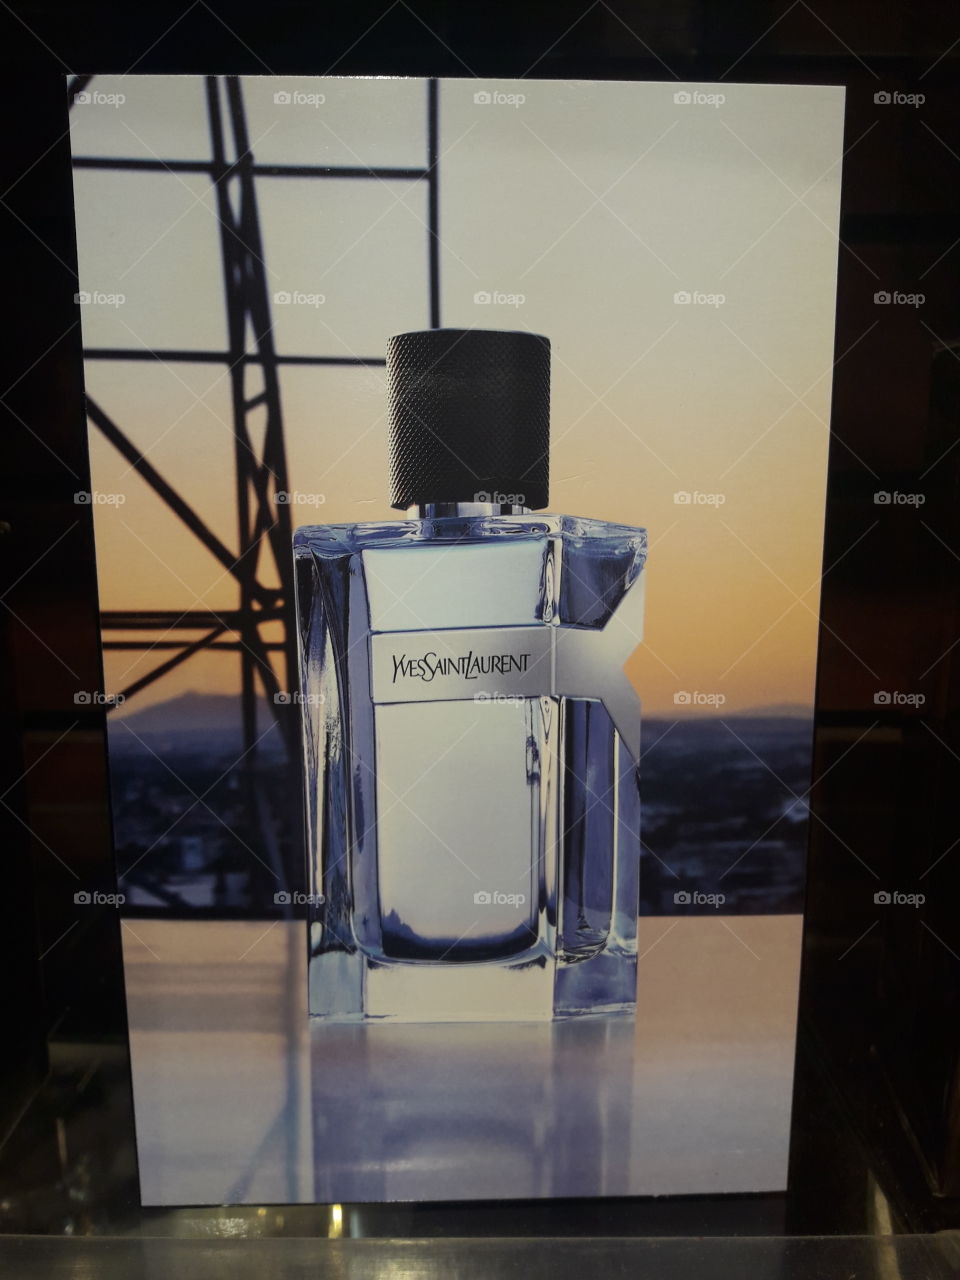 Y PEF good smelling and  good  for men buy it check it out now I know you  like it.